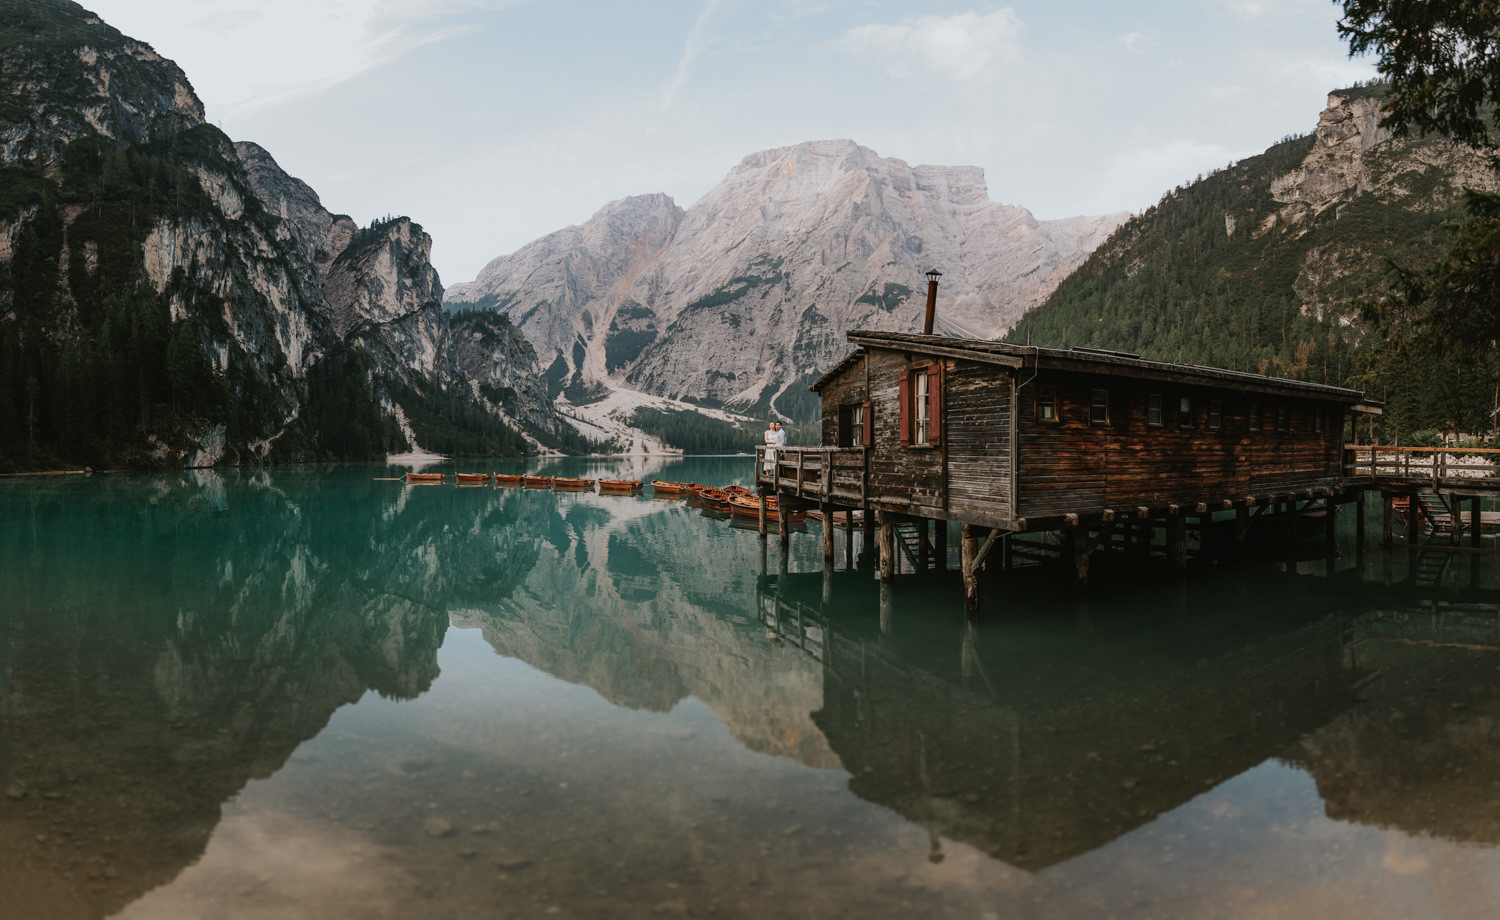 A couple stand far away in the center of the frame. They are standing on the wooden dock of the Lago di Braies boathouse, with the dramatic Dolomites mountains reflected in the crystal clear water.